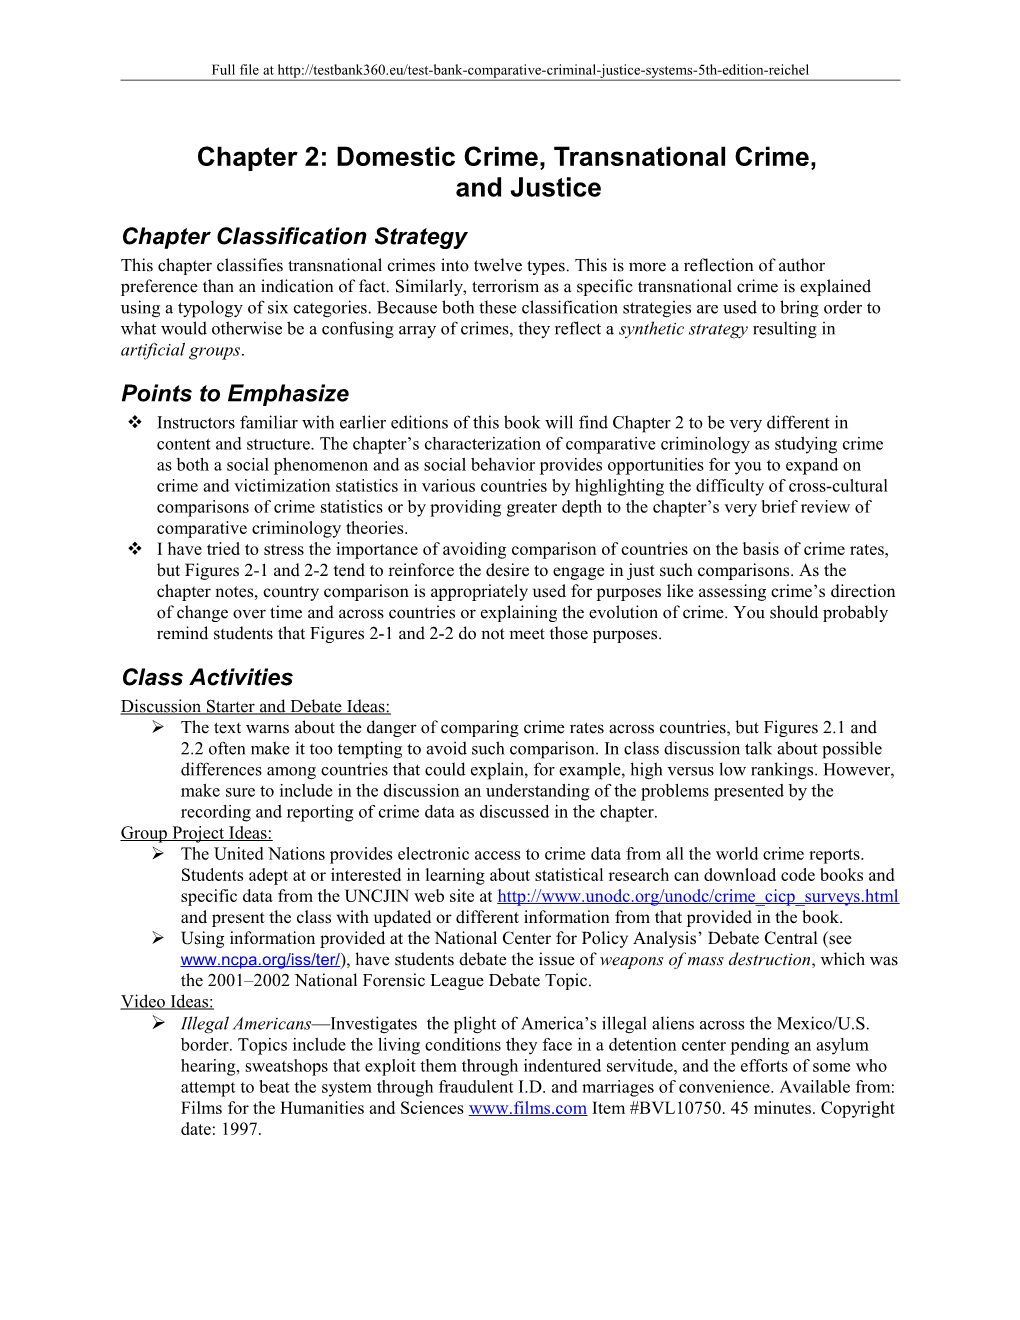 Chapter 2: Crime, Transnational Crime, and Justice